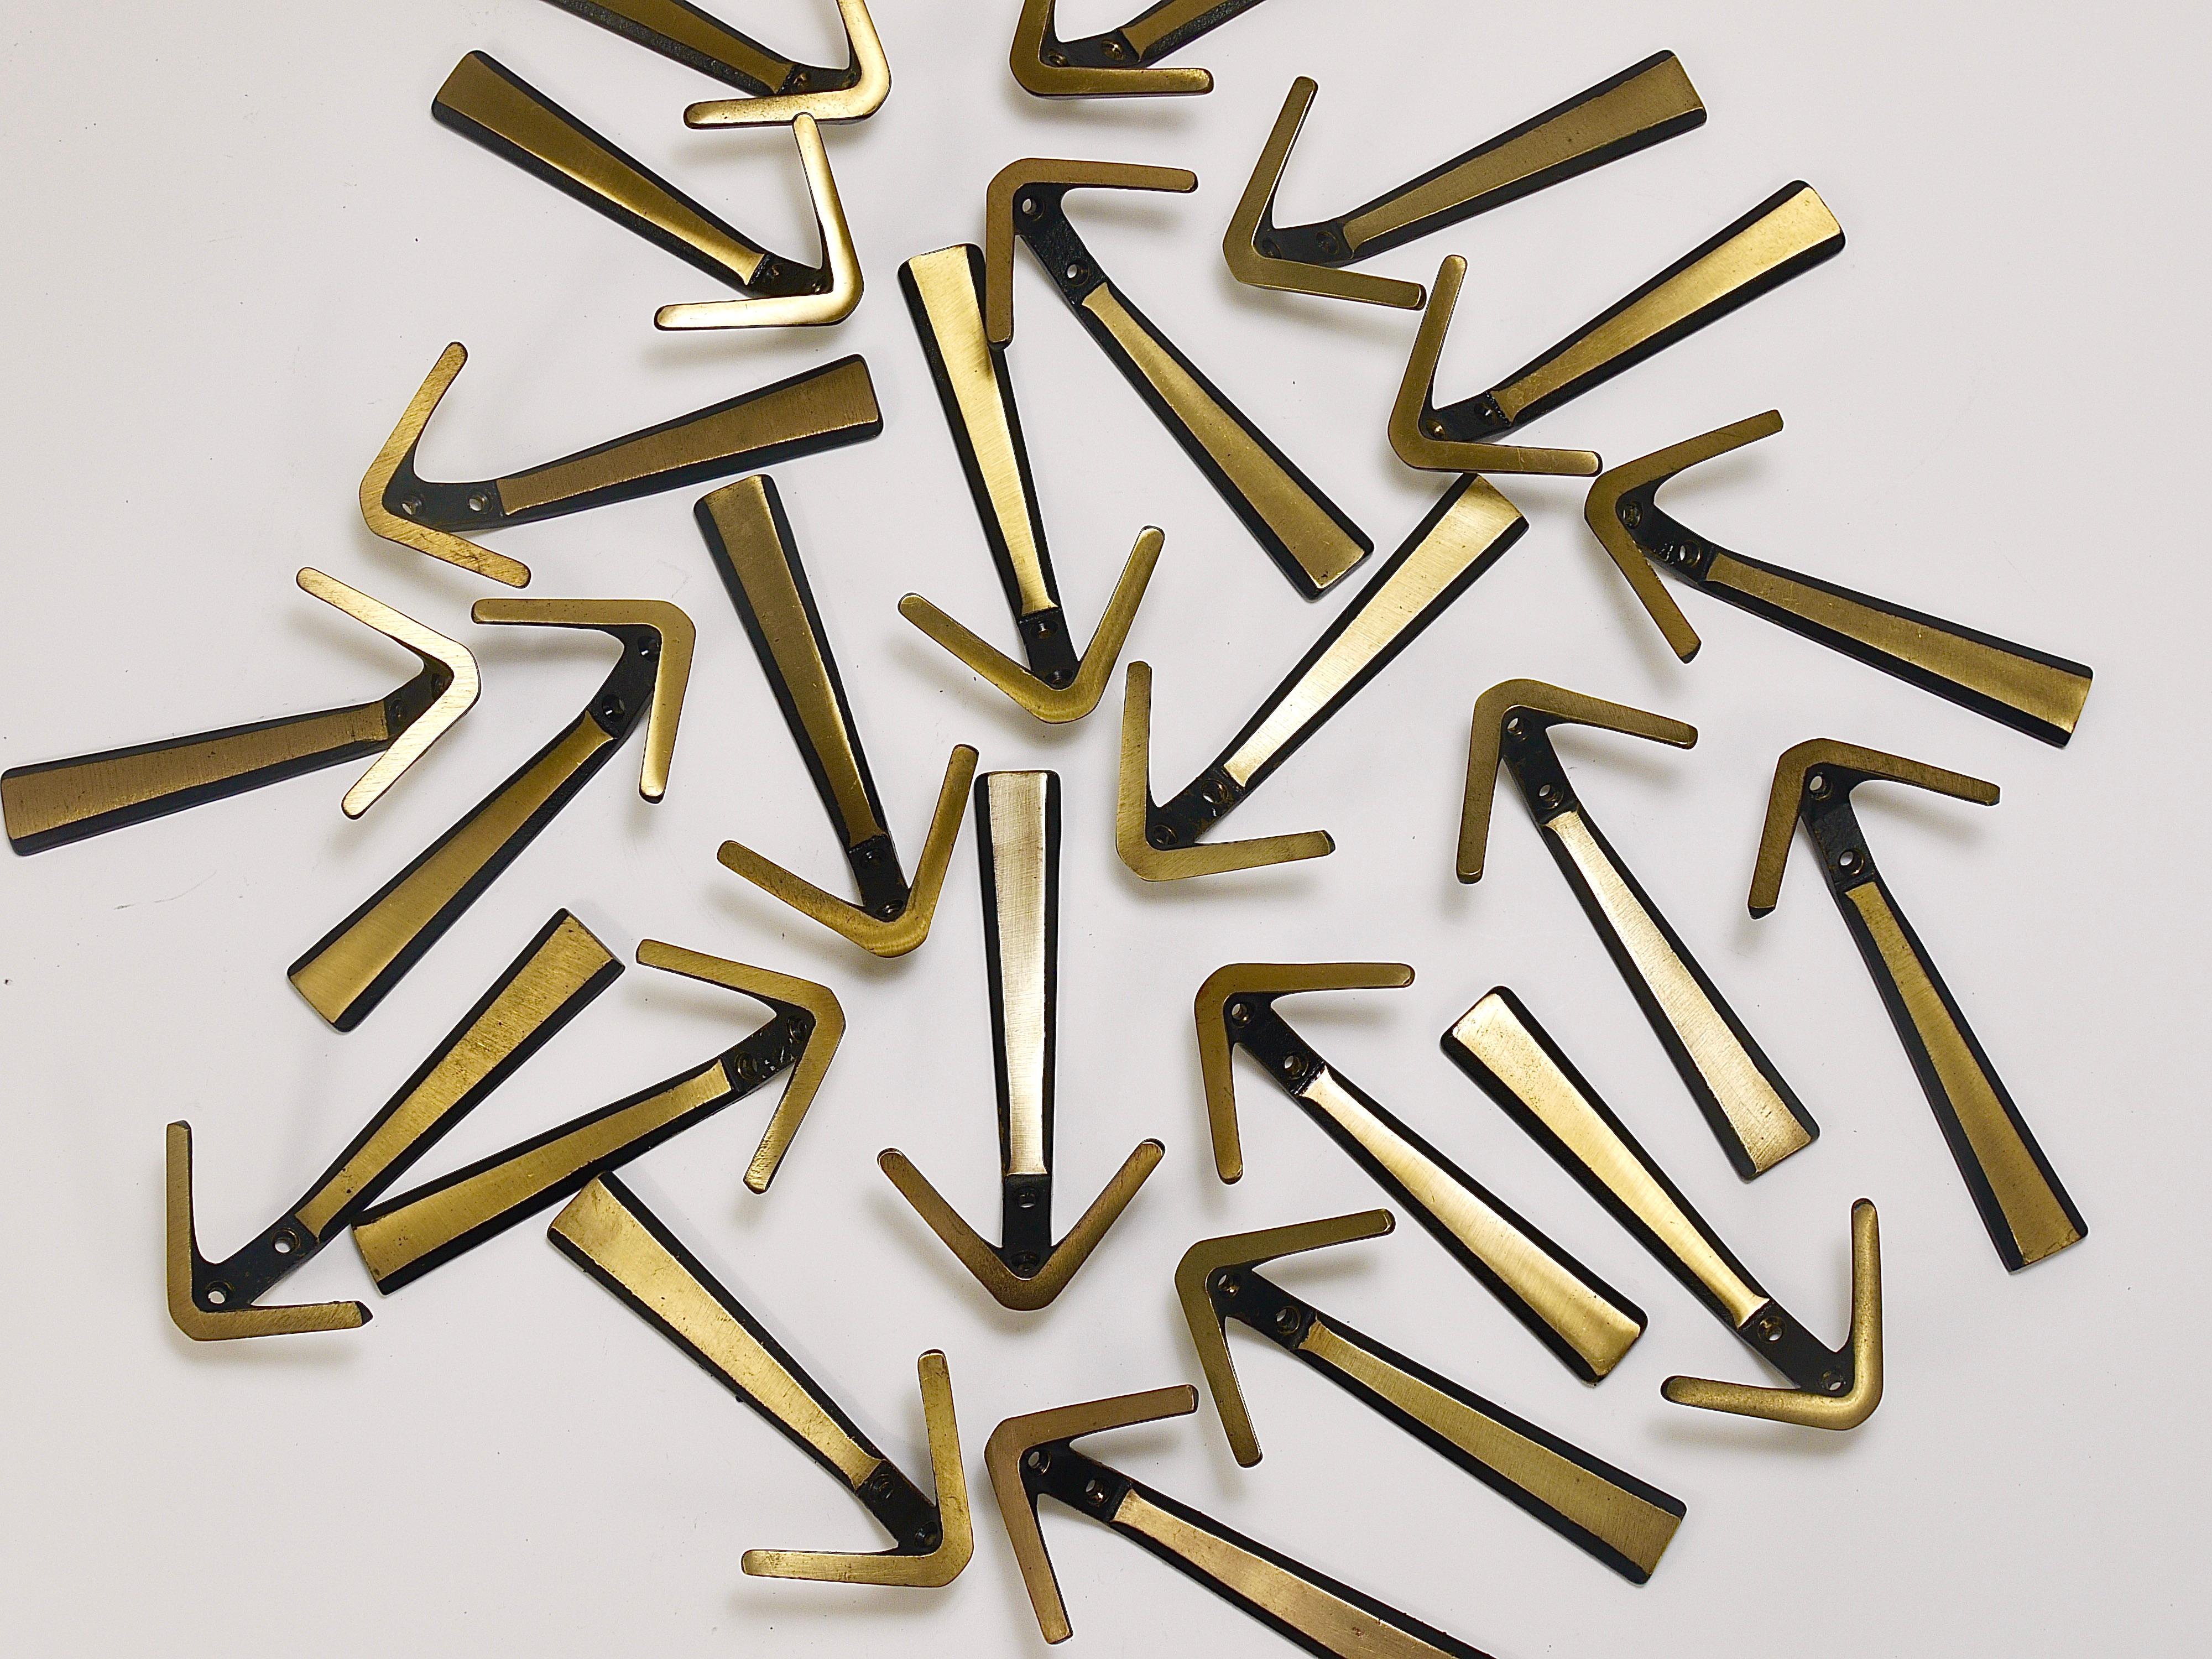 Up to 27 beautiful Austrian modernist V-shaped brass double wall hooks, manufactured in the 1950s by Hertha Baller in Vienna / Austria. Made of black finished and partly brushed brass, solid pieces in very good condition with marginal patina. We